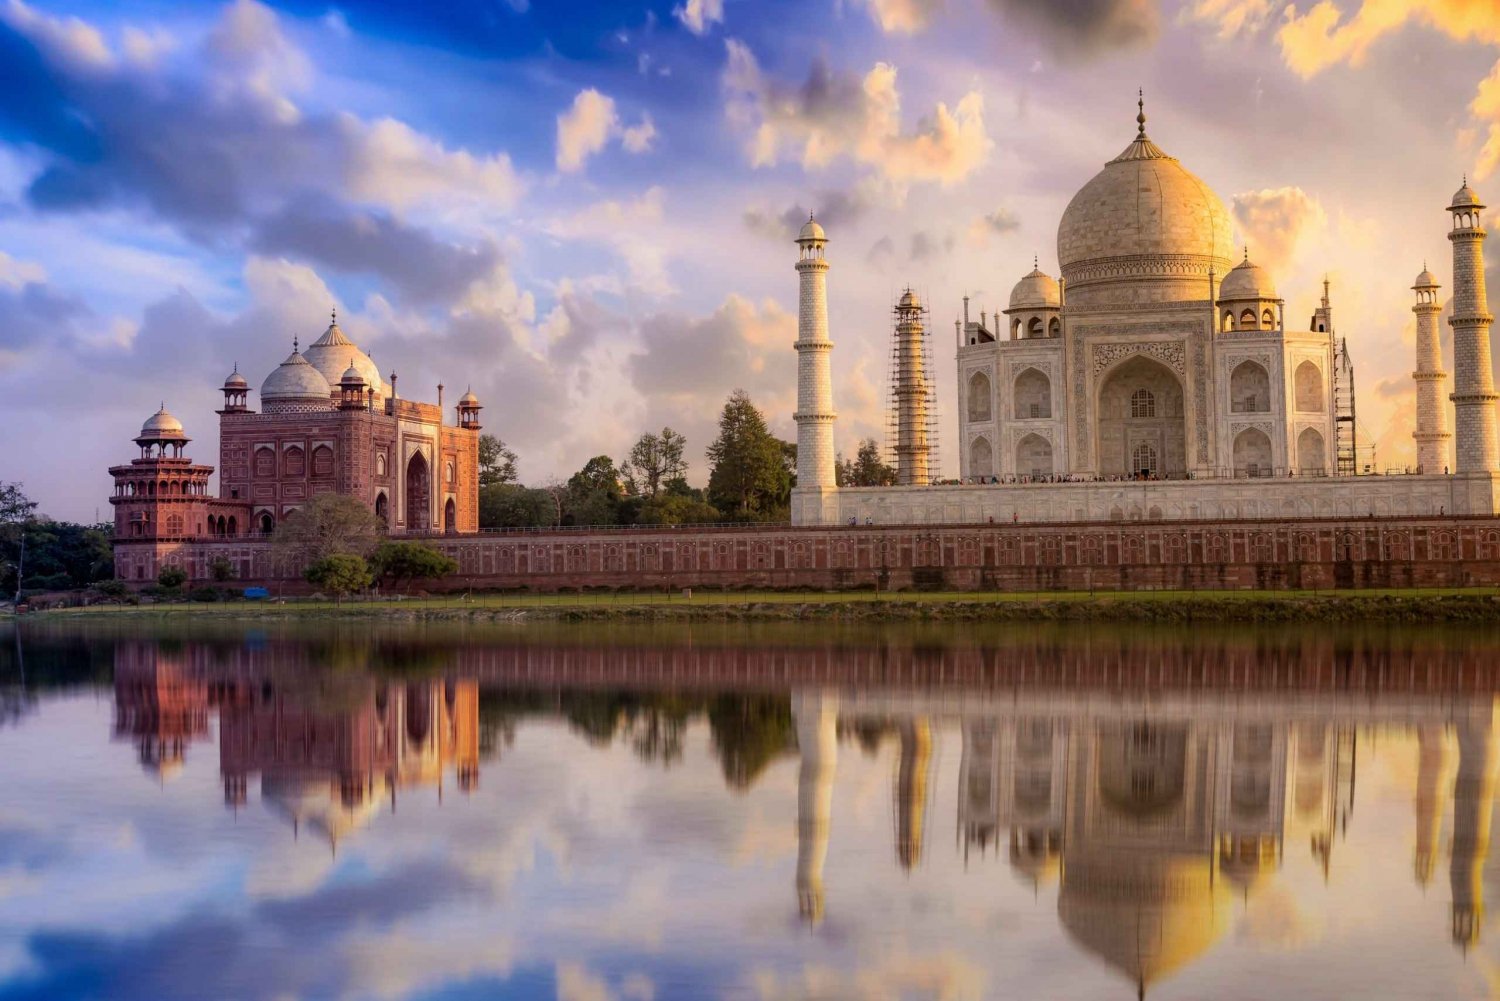 From Jaipur: Taj Mahal & Agra Tour with Lunch & Entry Fee